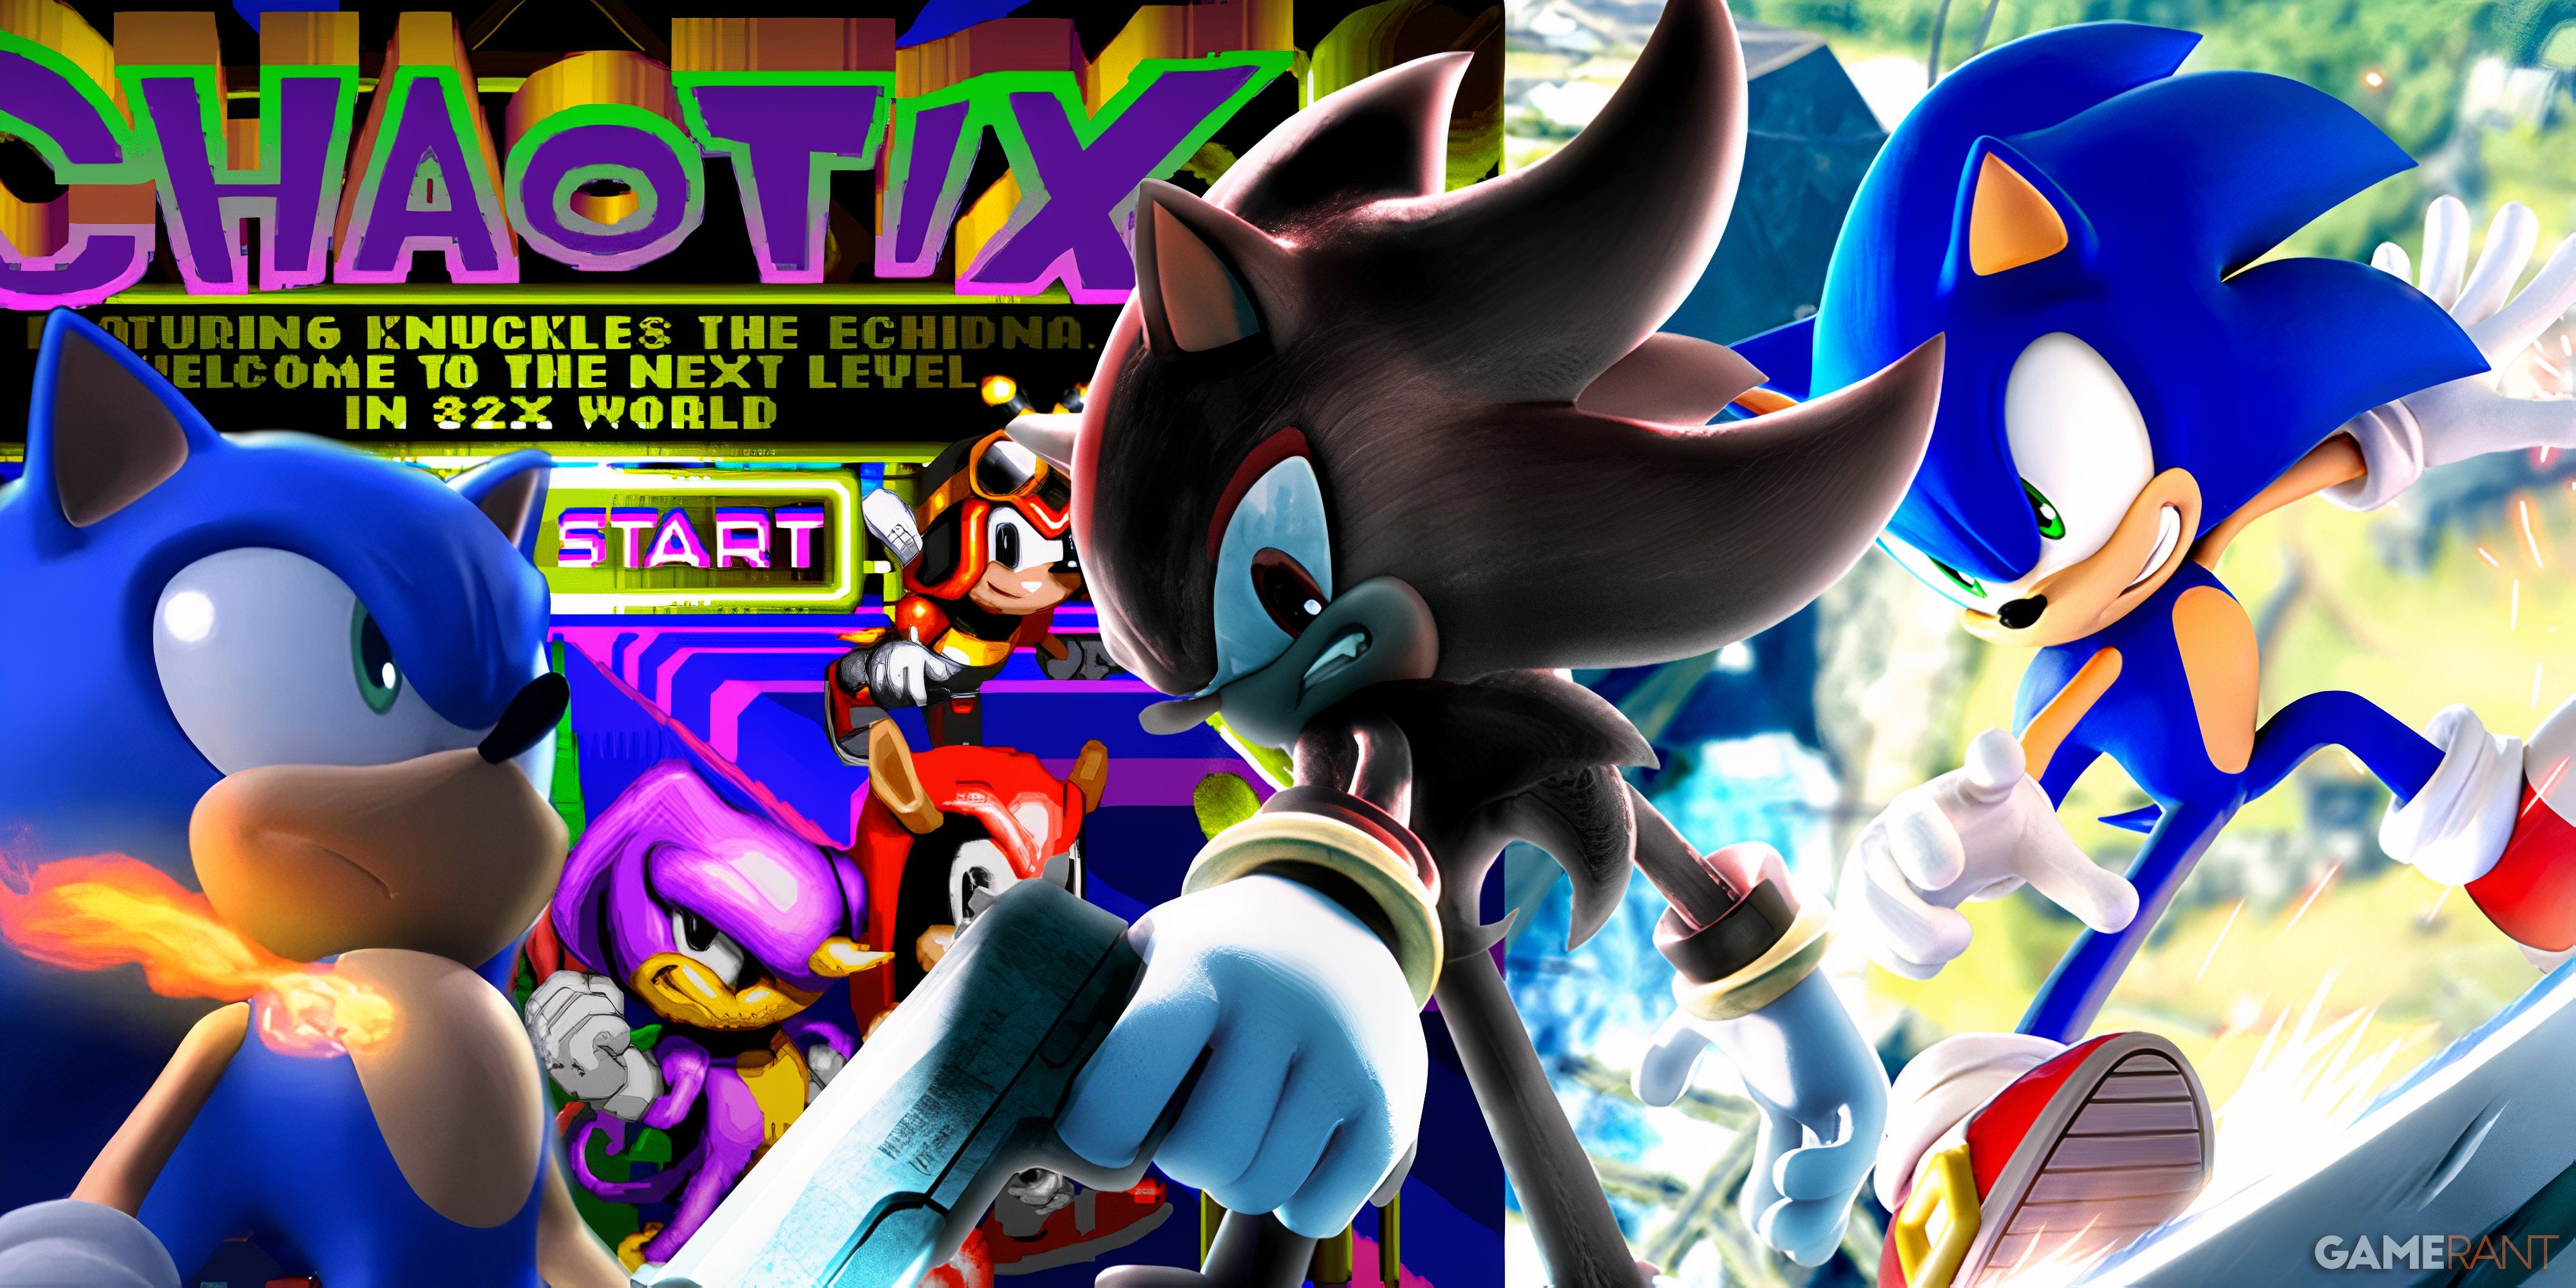 knuckles chaotix start screen, sonic frontiers cover art, still images of sonic and shadow 